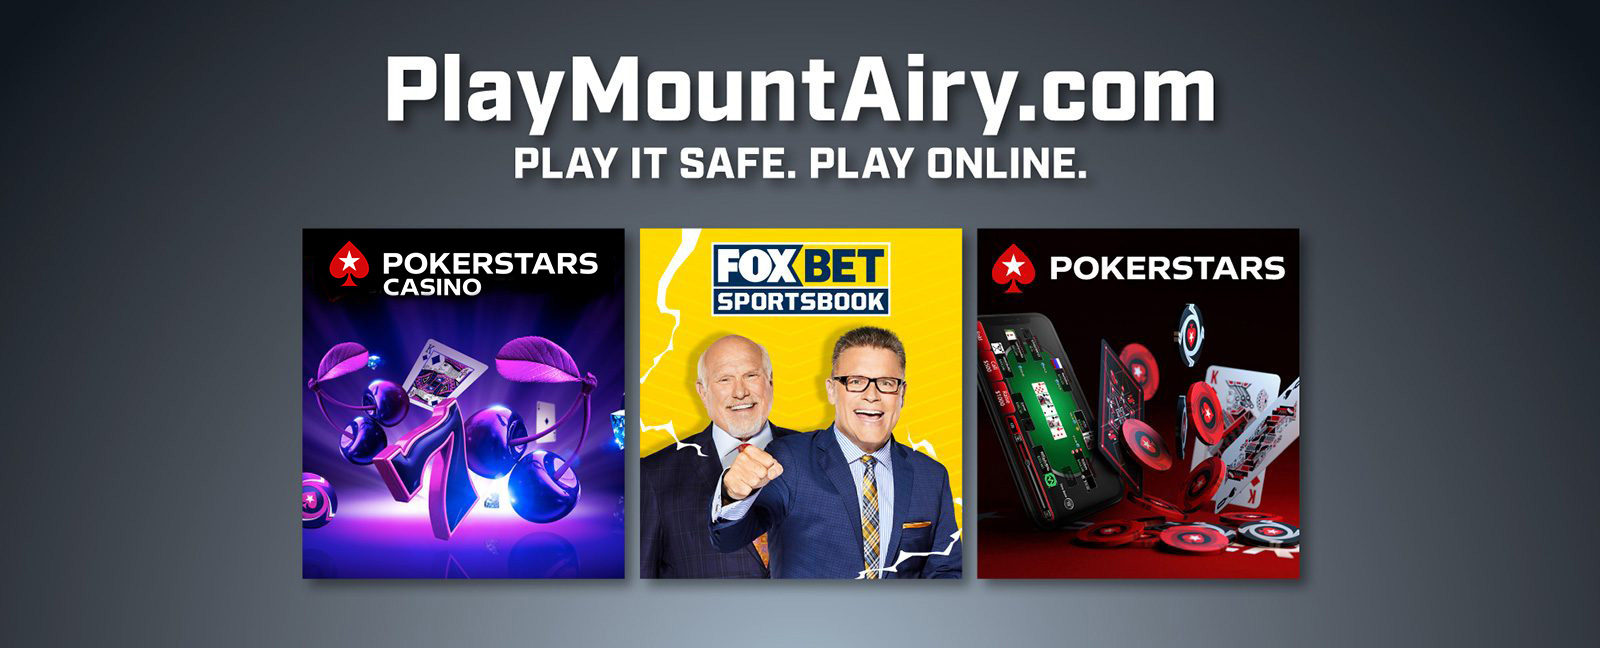 playmountairy.com play it safe play it online